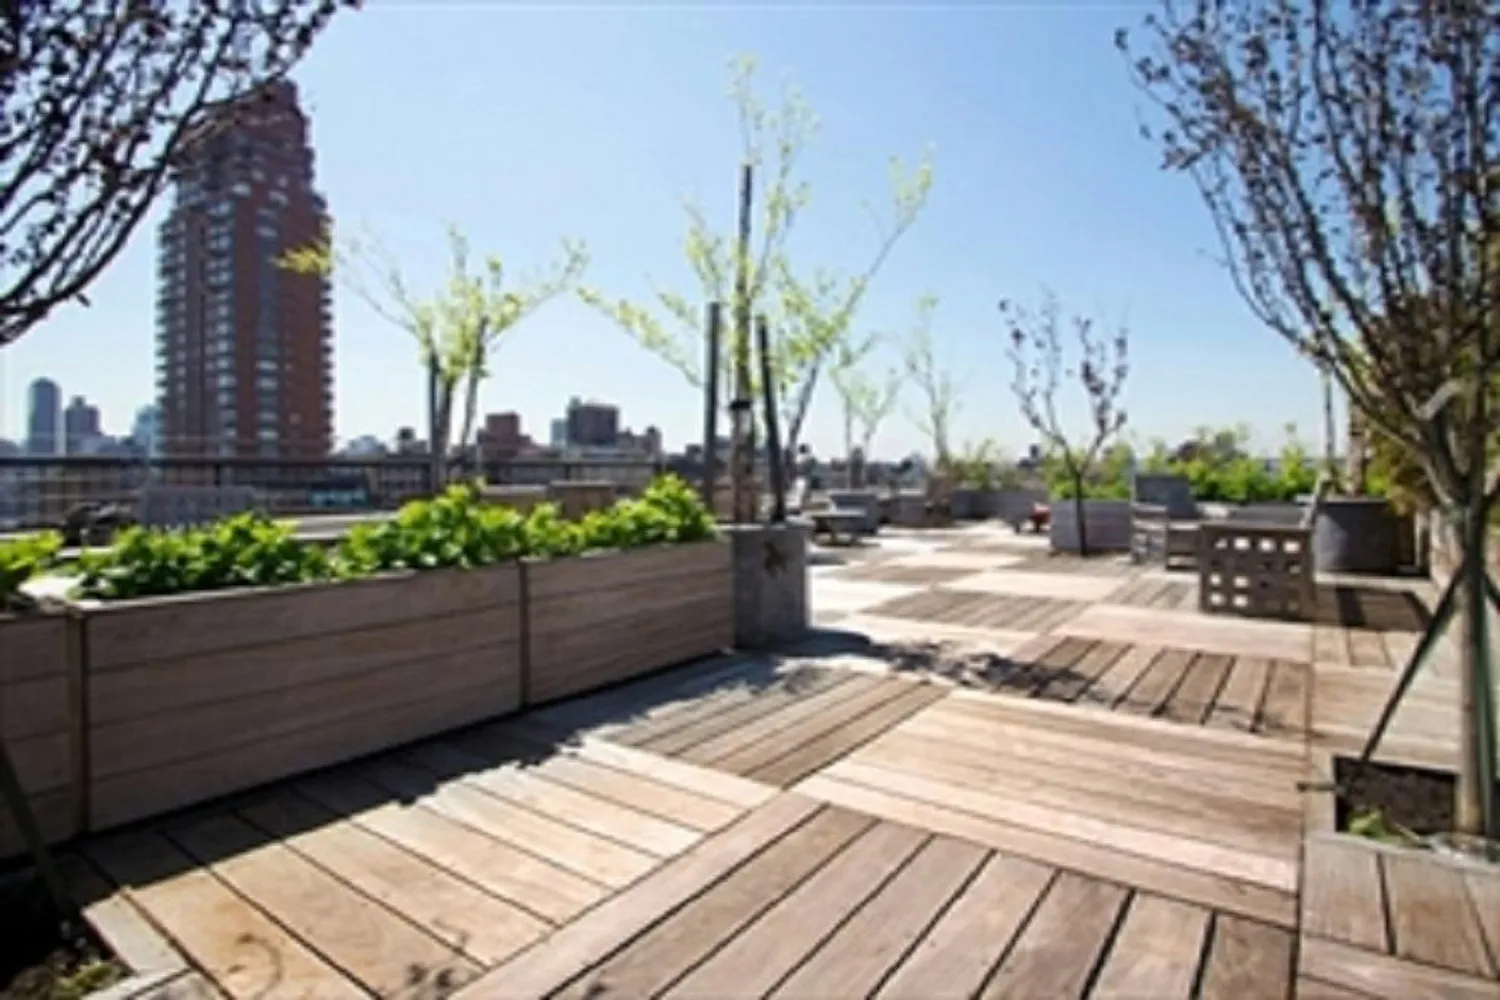 Beautifully planted roof deck with stunning views!